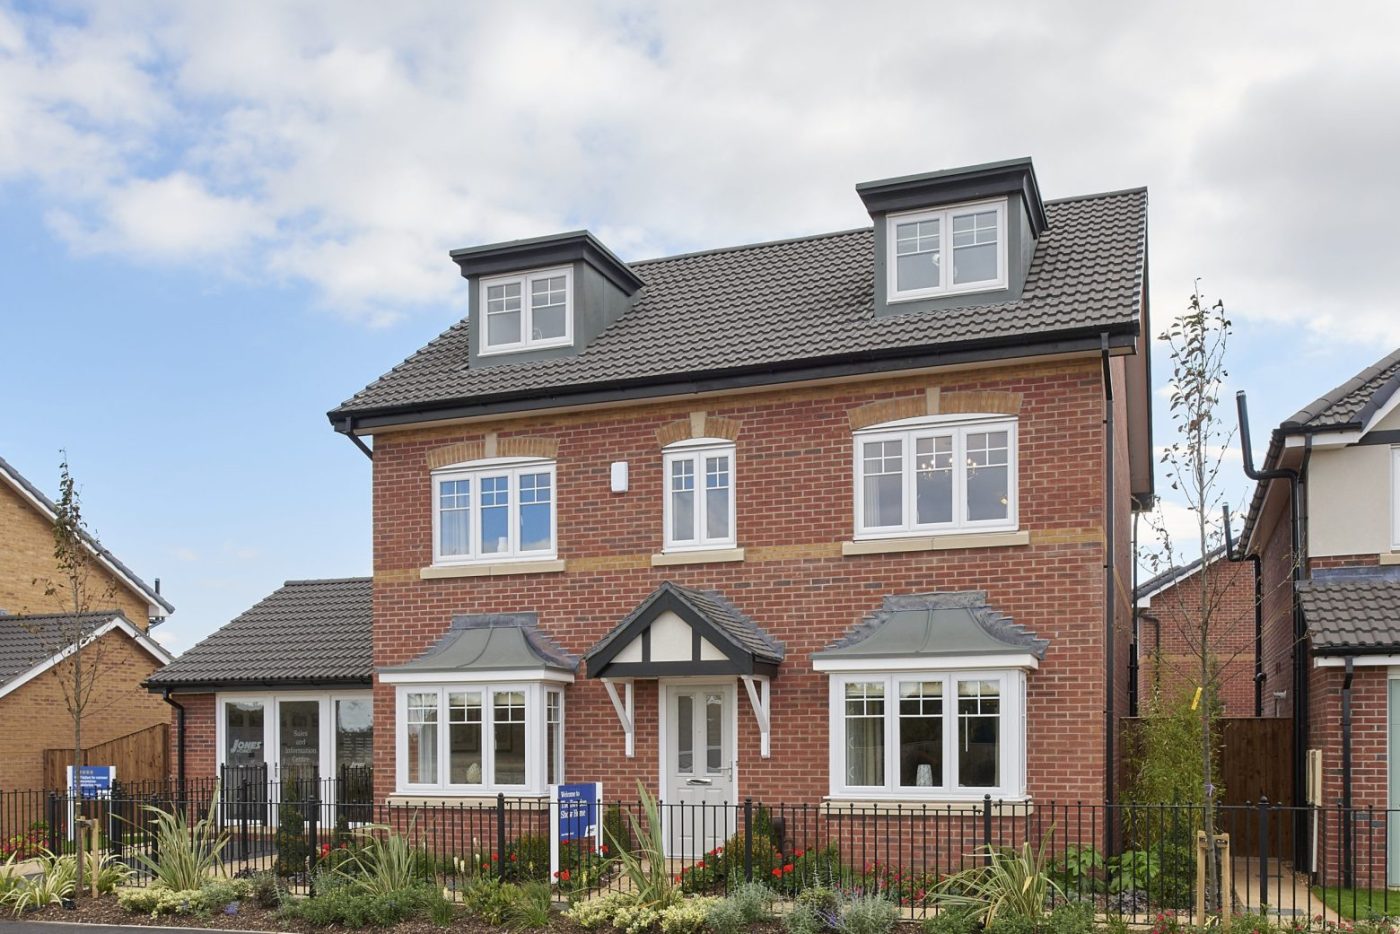 Flexible three-storey living for growing families at Worksop development